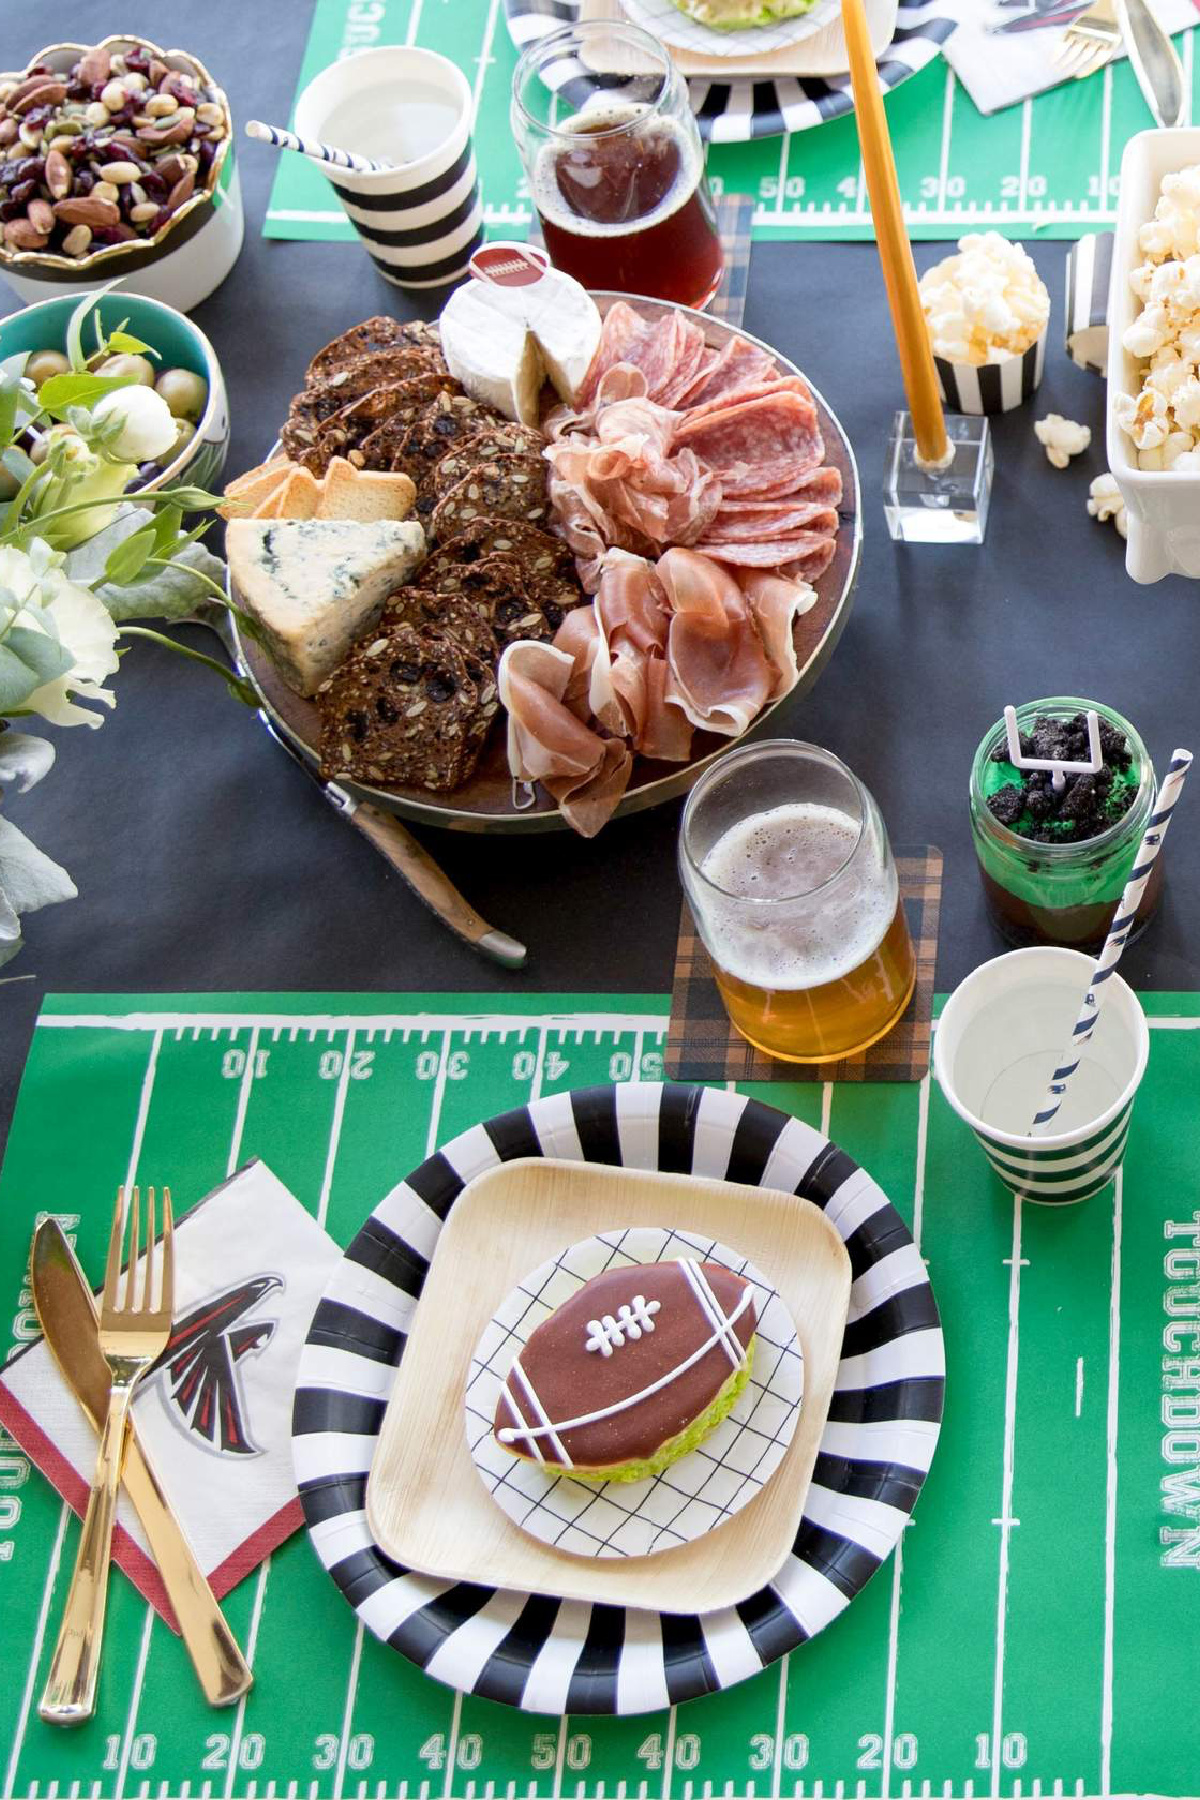 Best Party Themes for Adults  - Super Bowl Parties